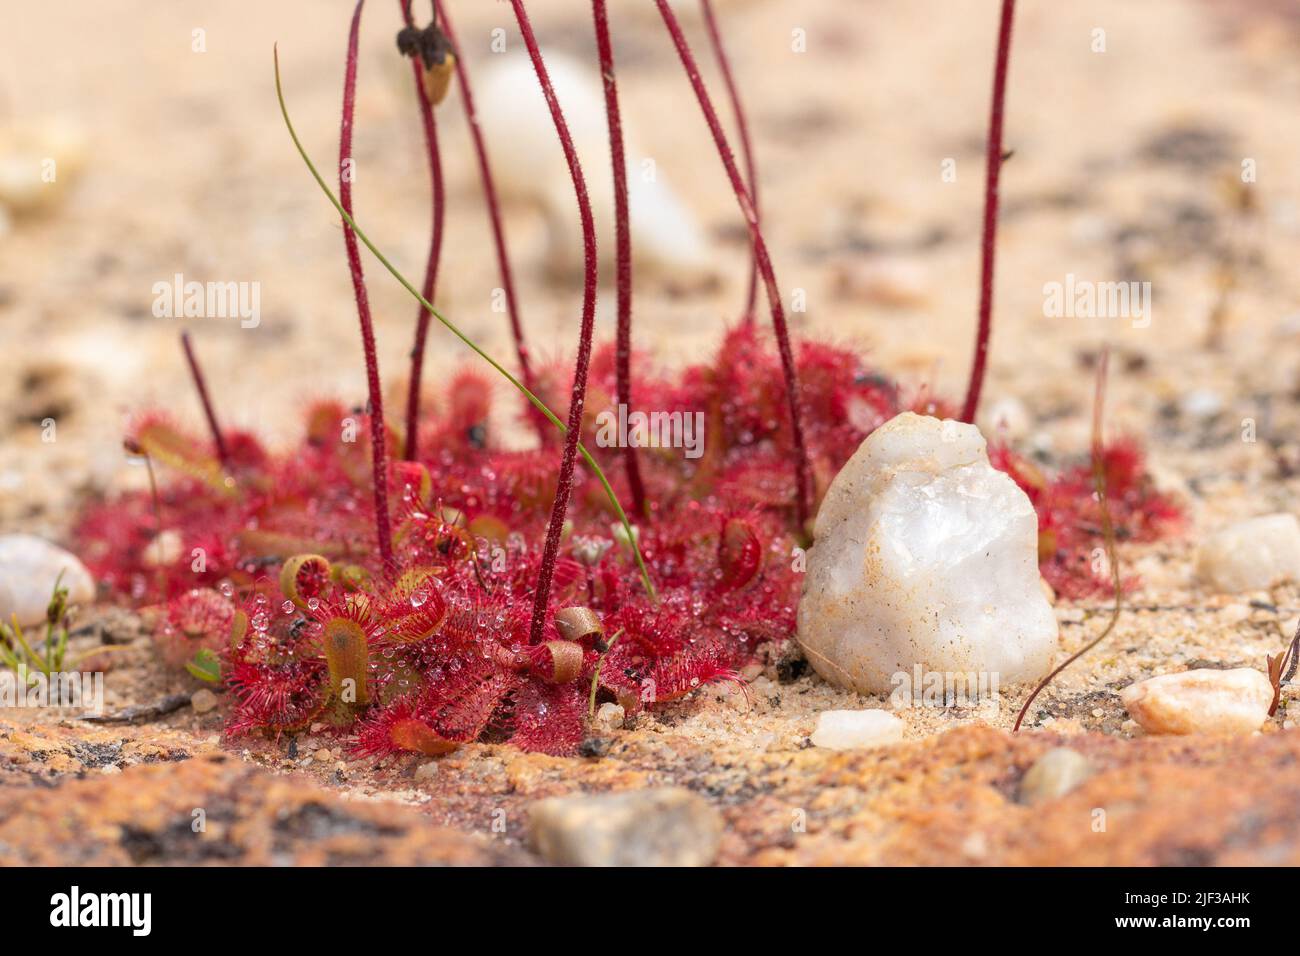 Drosera sp. with red rosettes and small white stone seen on the Bokkeveld Plateau near the town of Nieuwoudtville in South Africa Stock Photo